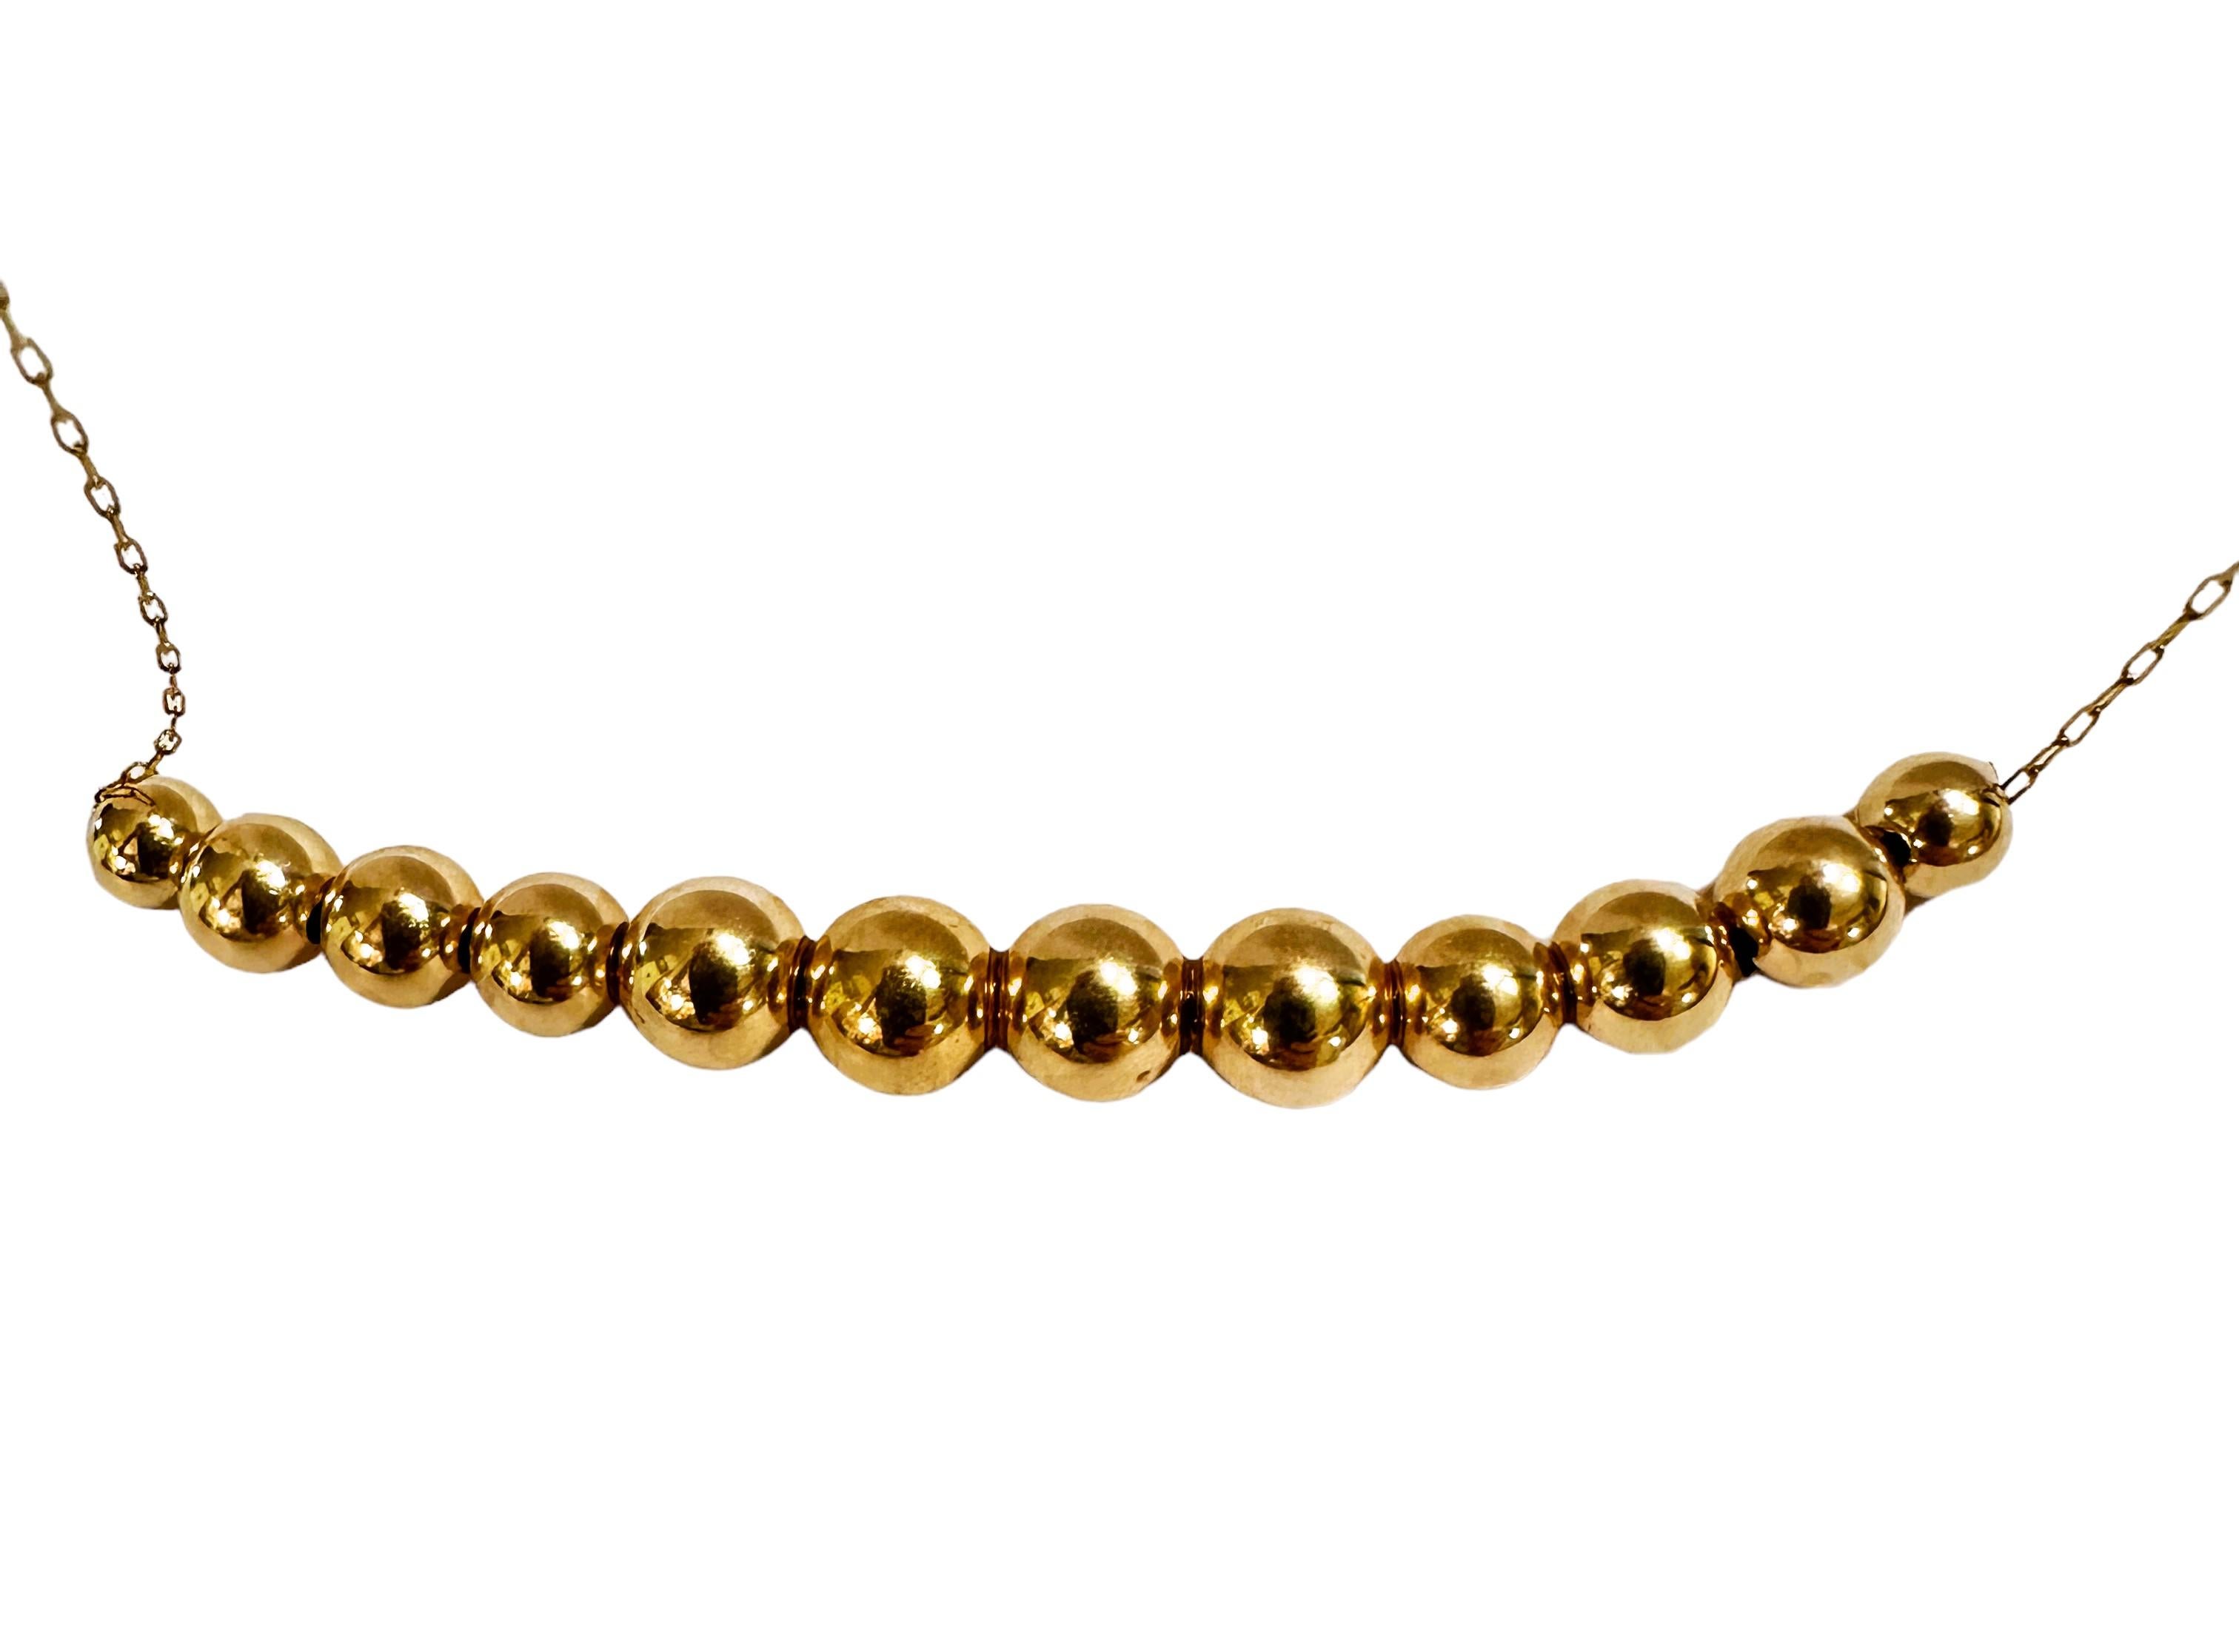 Women's 14K Yellow Gold Hollow Graduated Beaded Chain Necklace